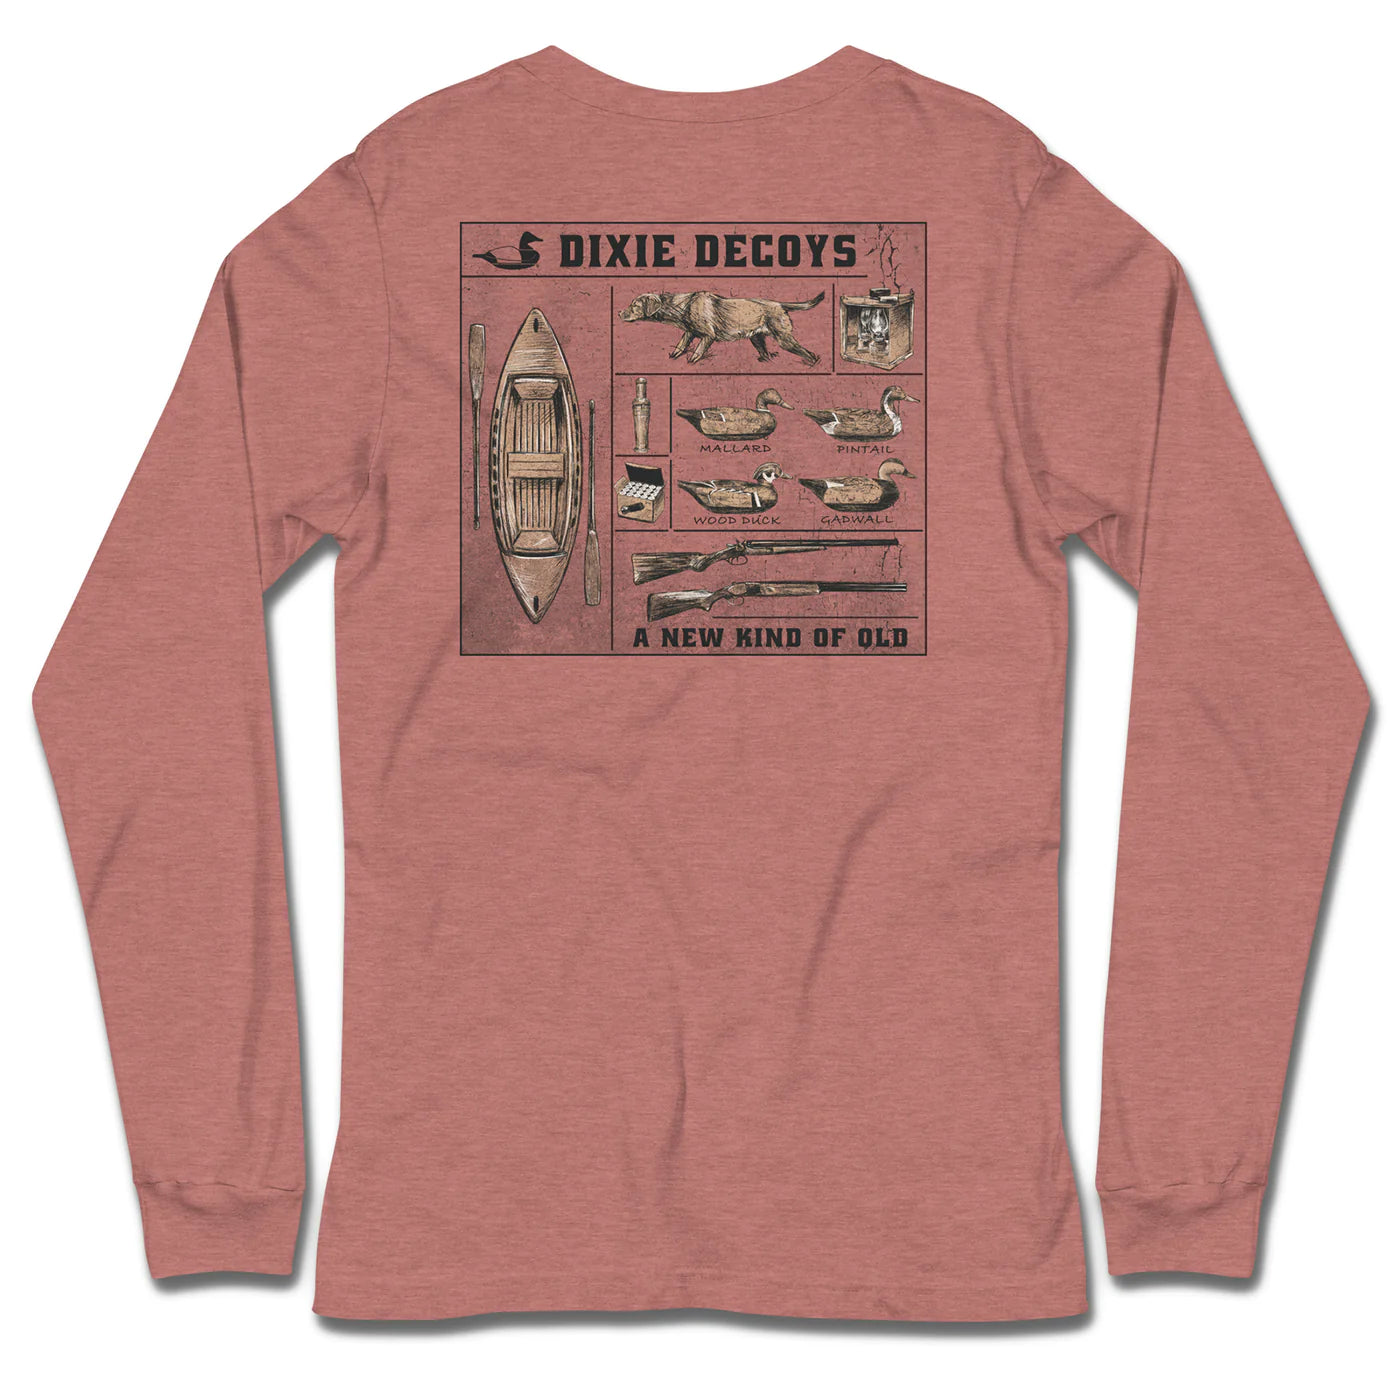 DIXIE DECOYS Men's Tees Final Sale - Dixie Decoys Tools Of The Trade Tee L/S || David's Clothing